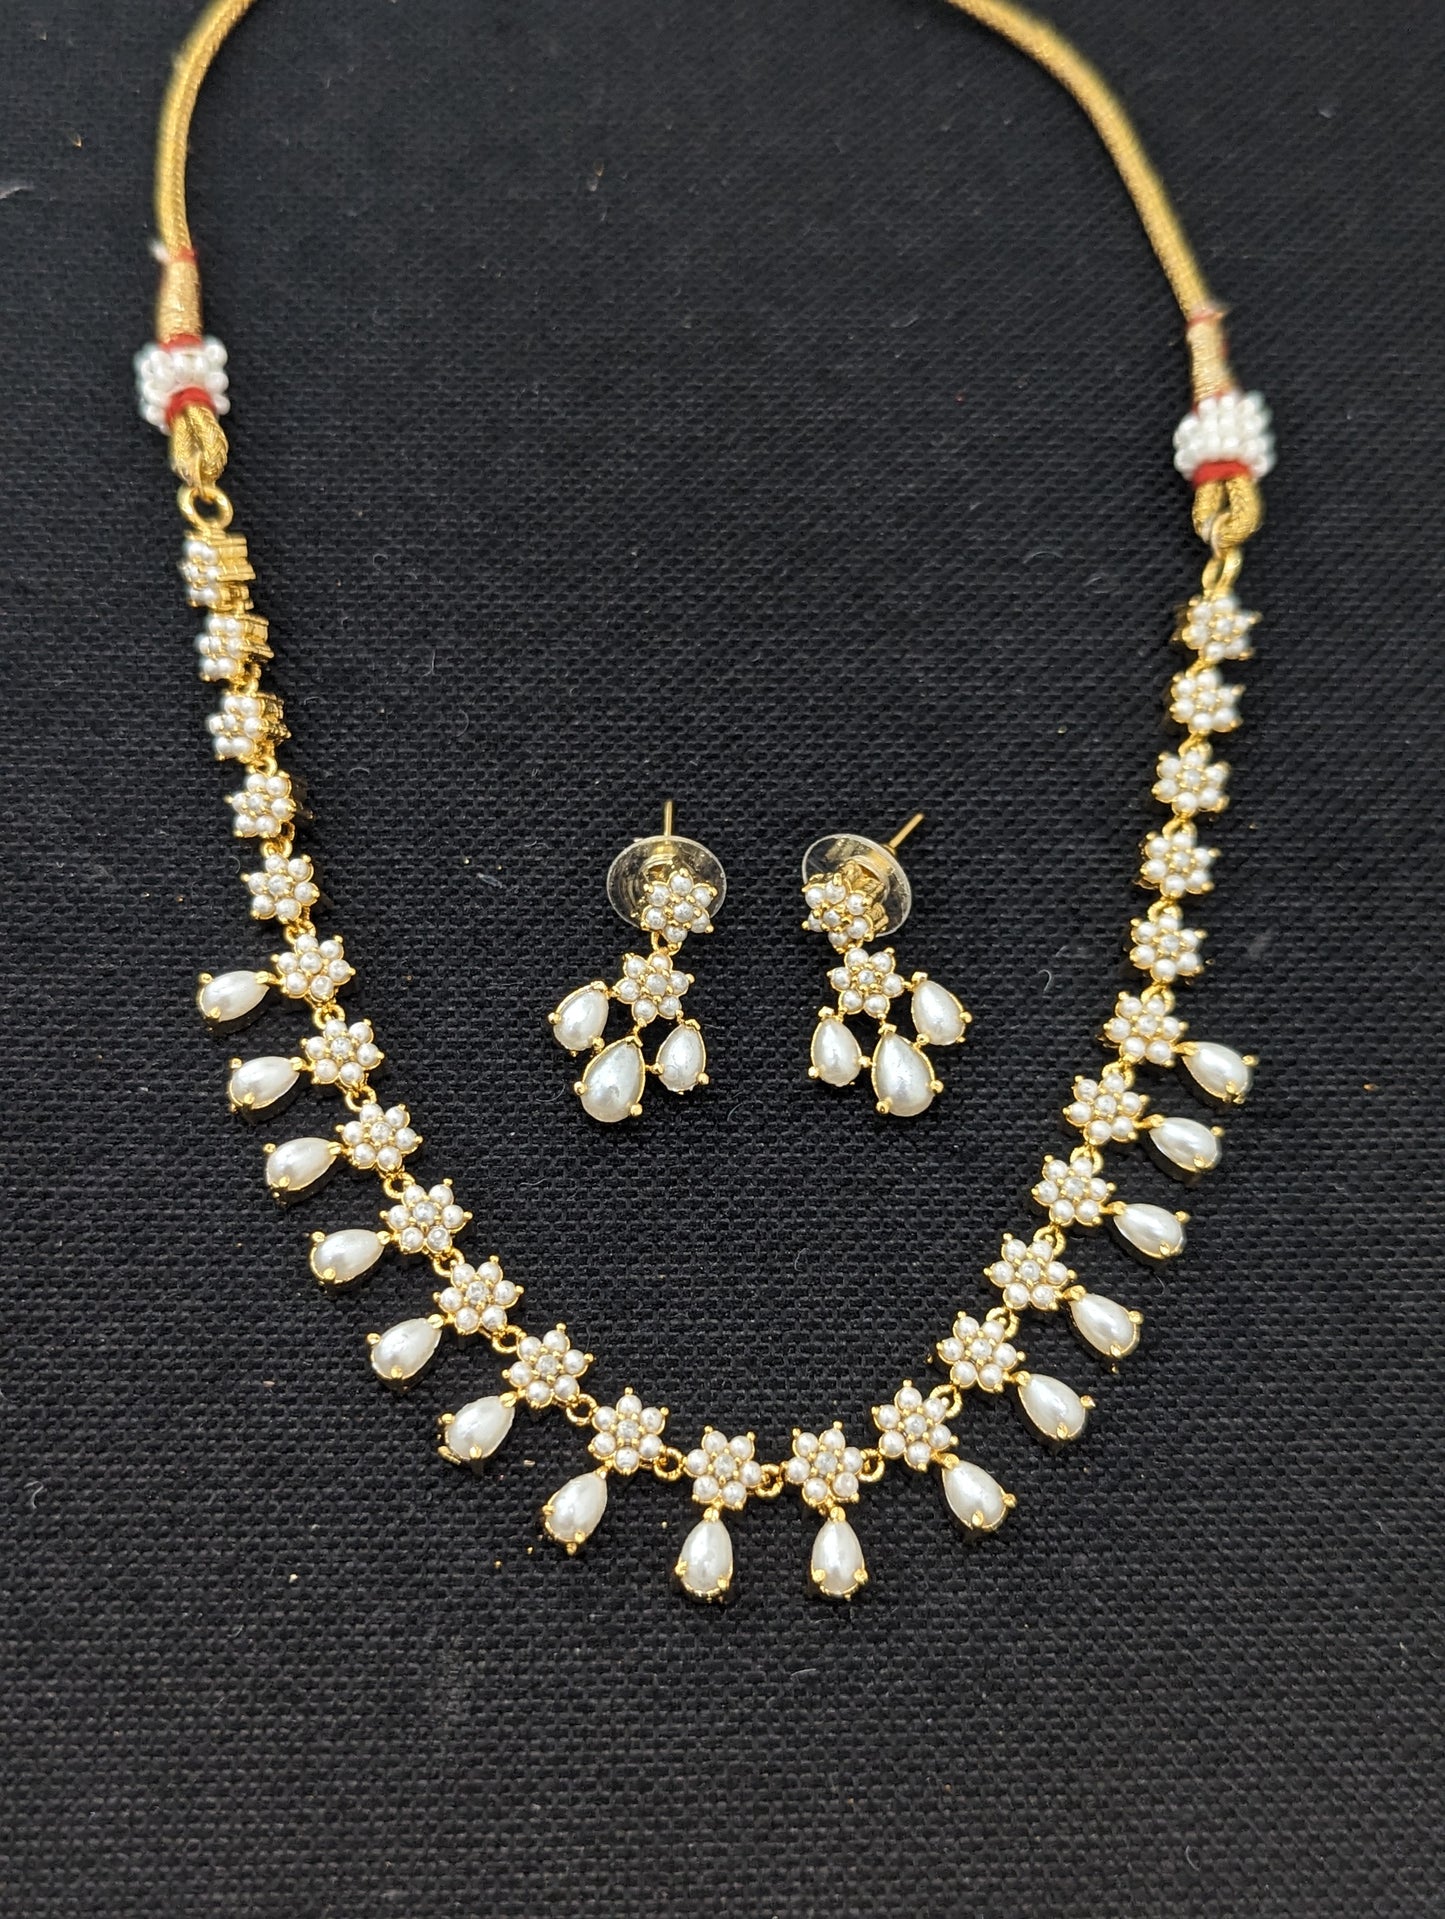 CZ Faux Pearl choker necklace and Earrings set